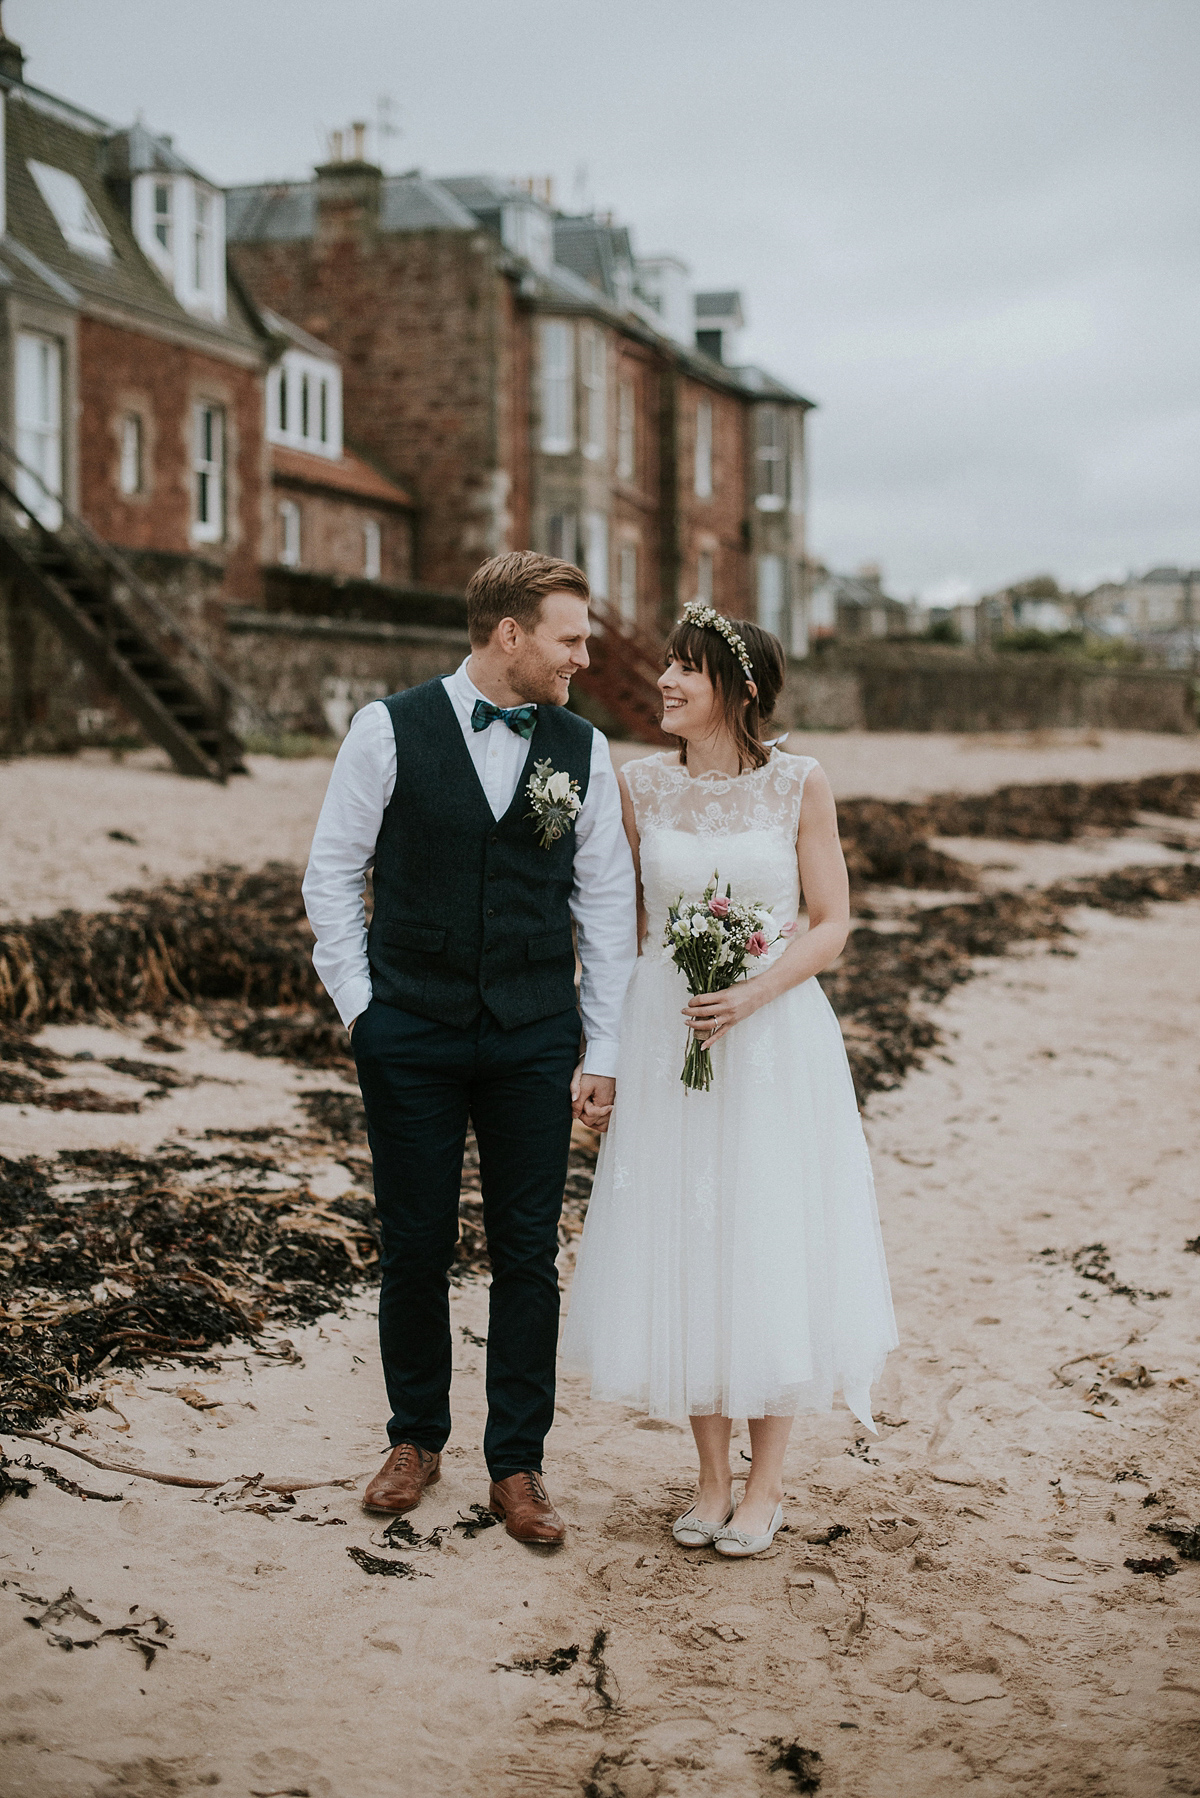 lovely wedding by the sea 28 1